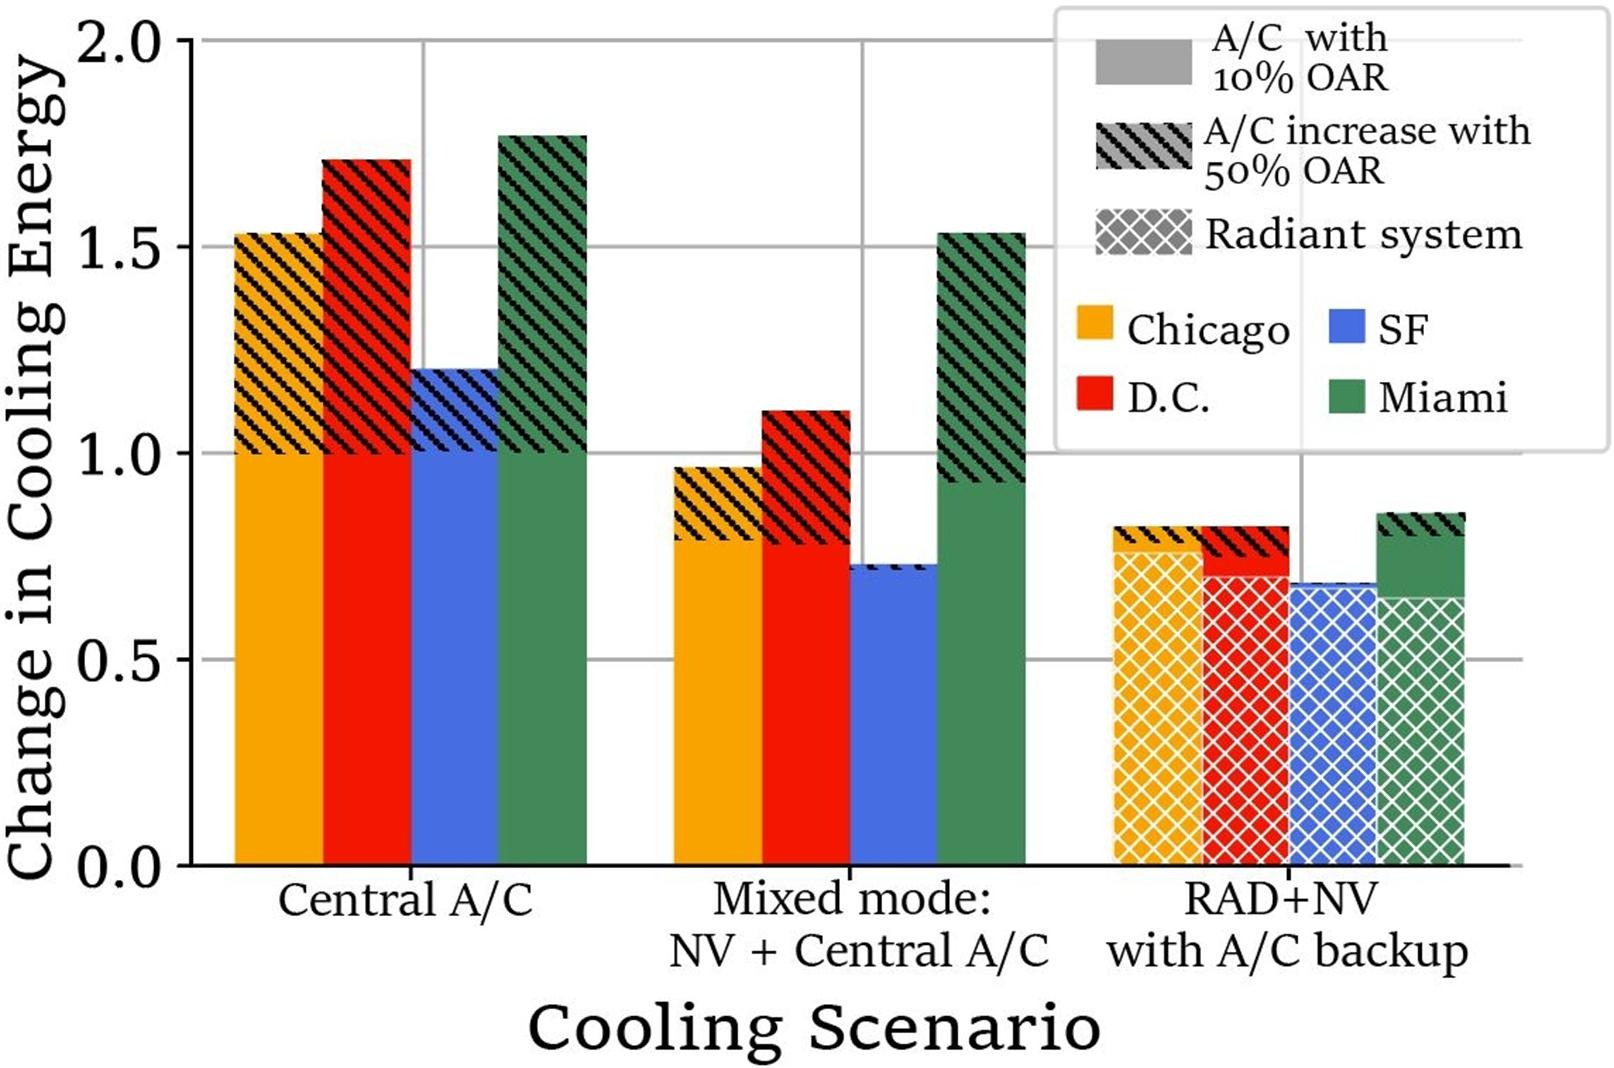 Article – Forrest Meggers and researchers showed that an often overlooked cooling technology can enable more ventilation in buildings around the world while substantially decreasing energy costs.